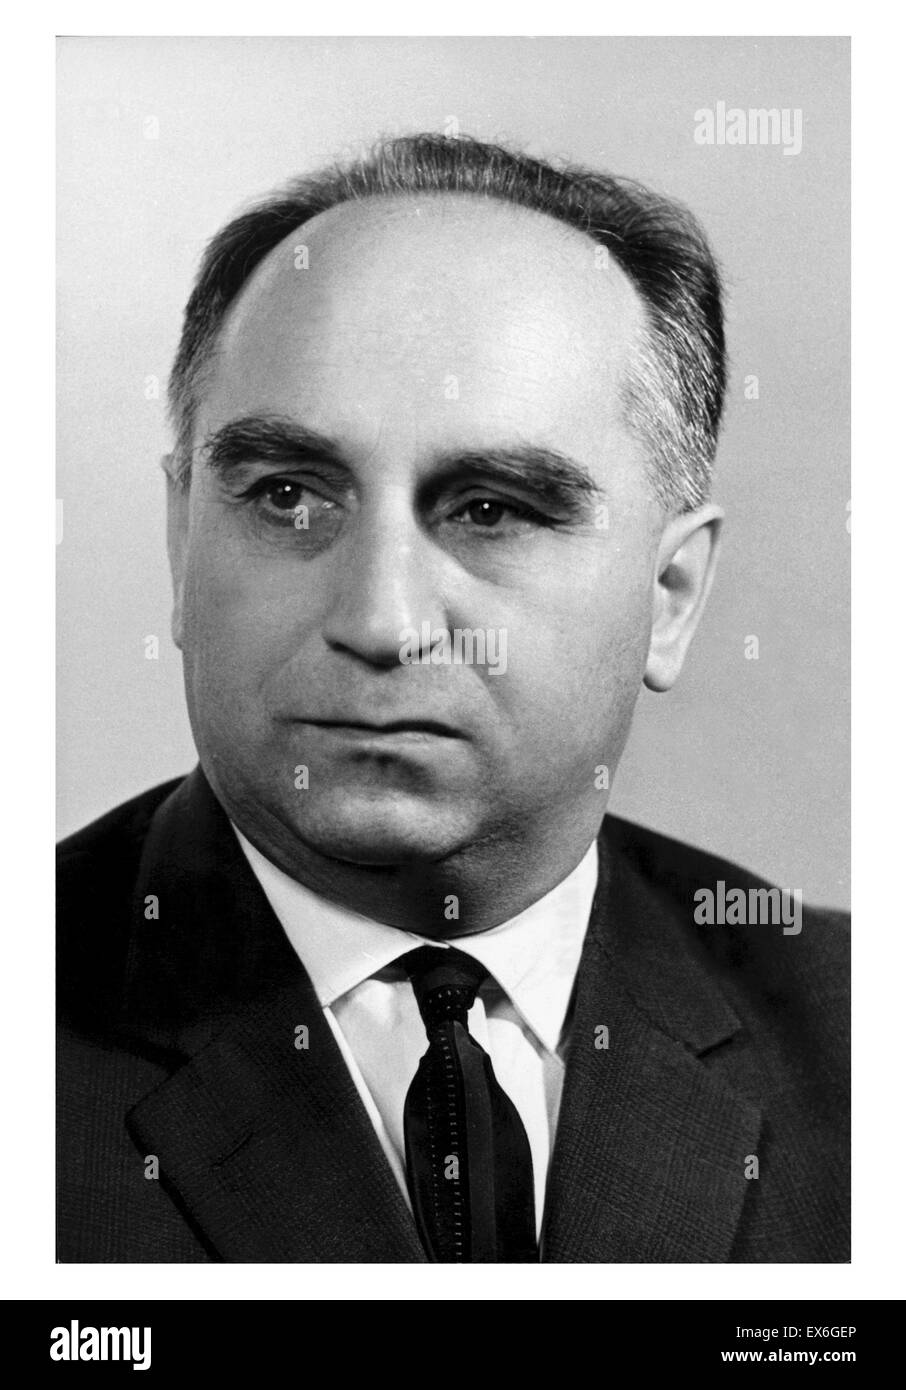 Stefan J?drychowski (9 May 1910 - 1996)[1] was a Polish journalist and communist politician, who served as deputy prime minister, foreign minister and finance minister in Poland Stock Photo